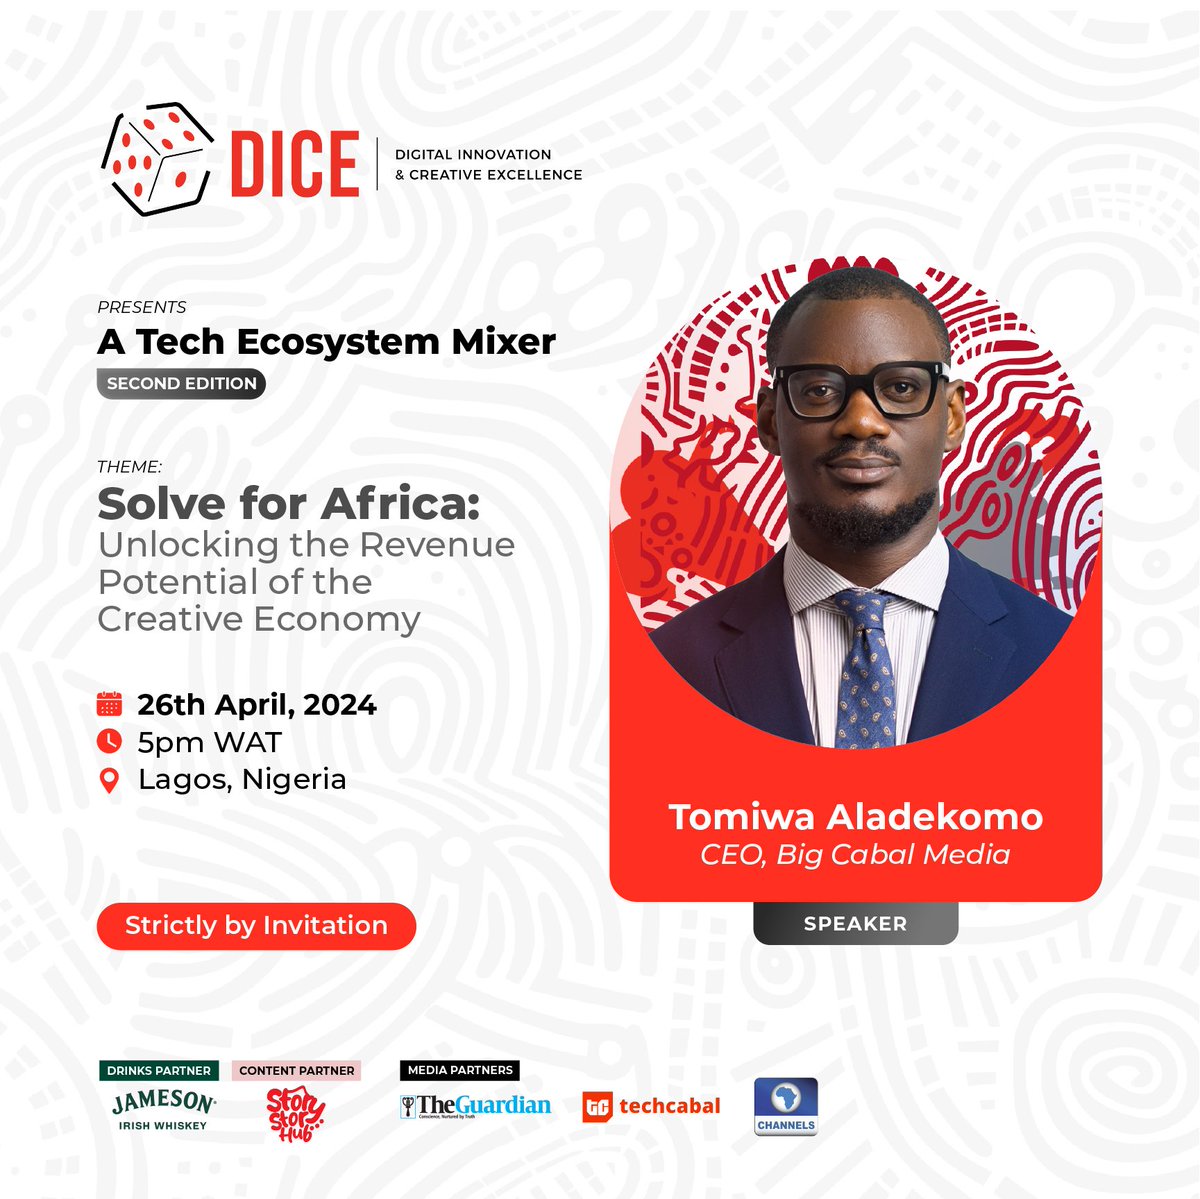 MEET OUR SPEAKER - @iamtomiwa, the CEO of Big Cabal Media; publishing TechCabal & Zikoko, and a Board Member of the Africa Tech & Creative Group. His passion and pace-setting work is exceptional.

Visit dice.beyondlimitsafrica.com for a chance to attend.

#SolveForAfrica #DICEMixer